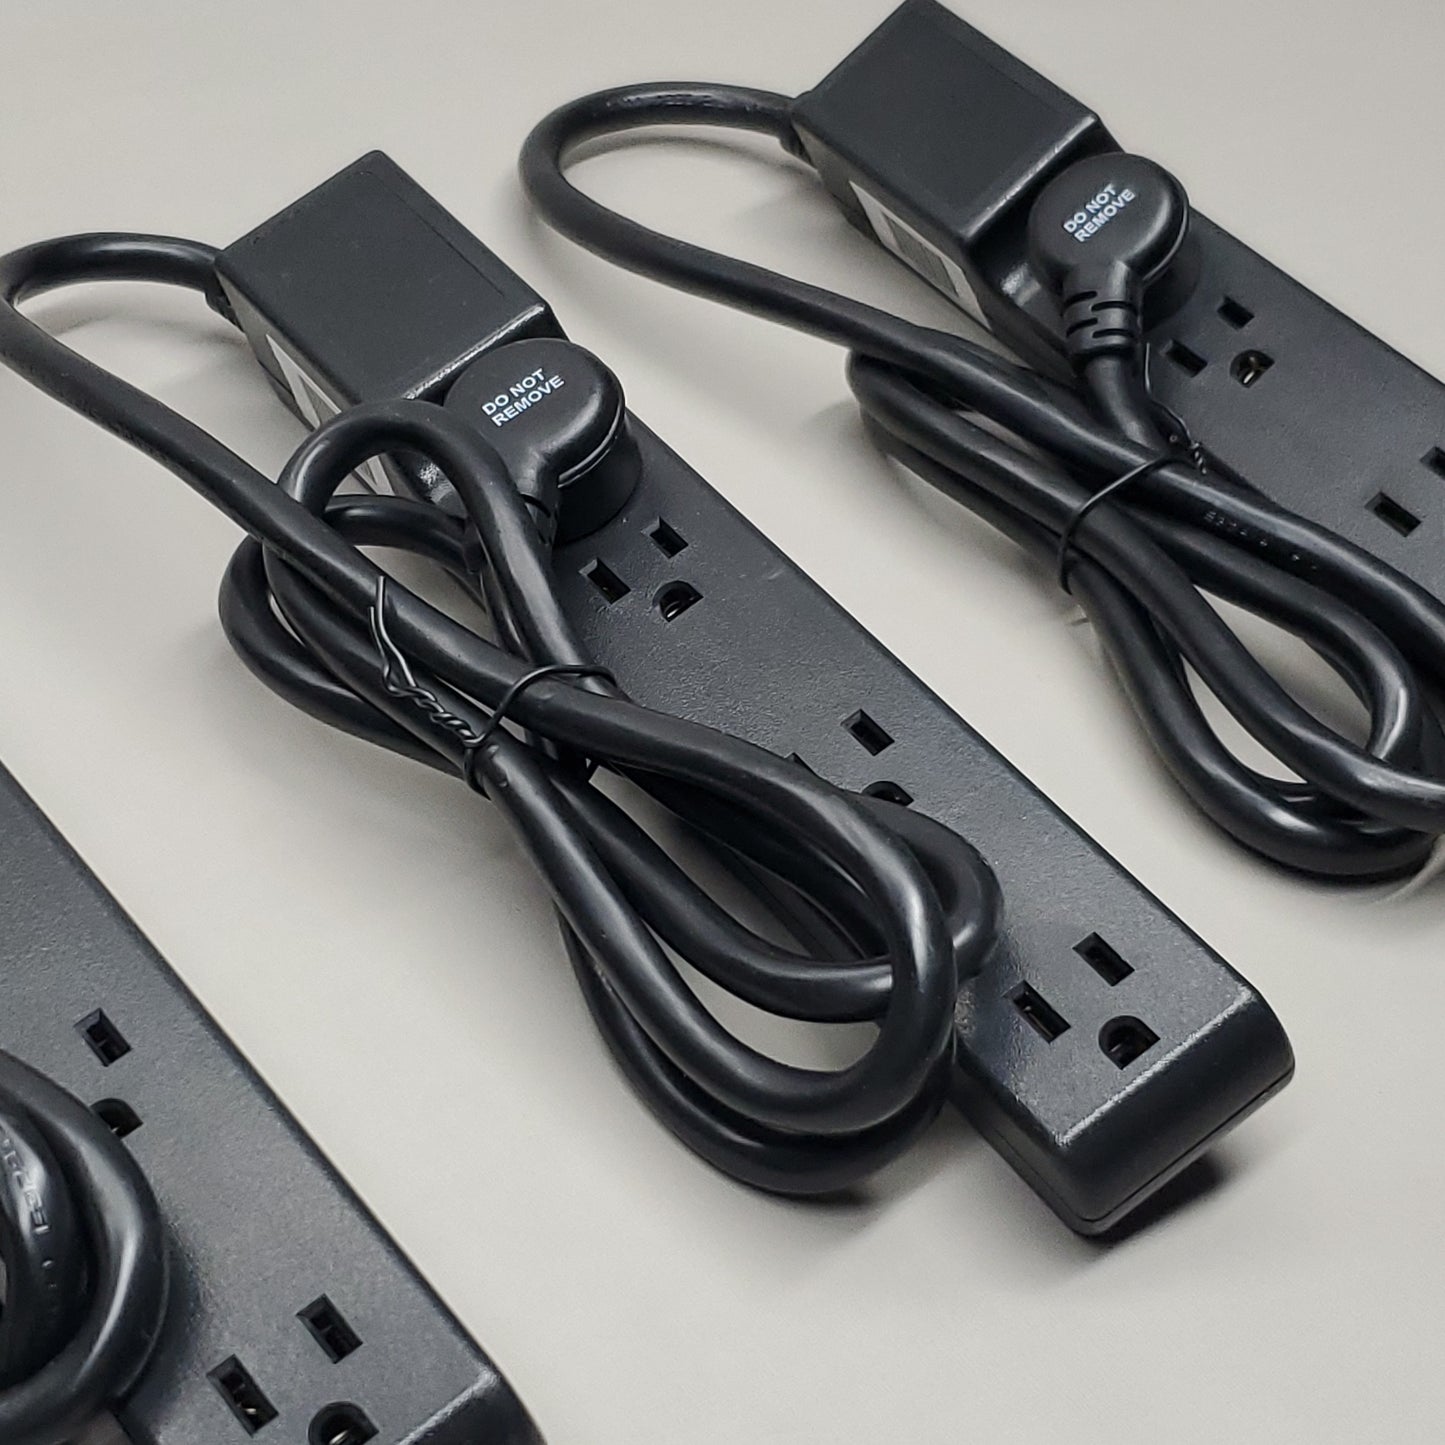 ALL SYSTEM BROADBAND 3-PACK! Power Strips 4-Outlet w/ 4' Extension Cable (New)